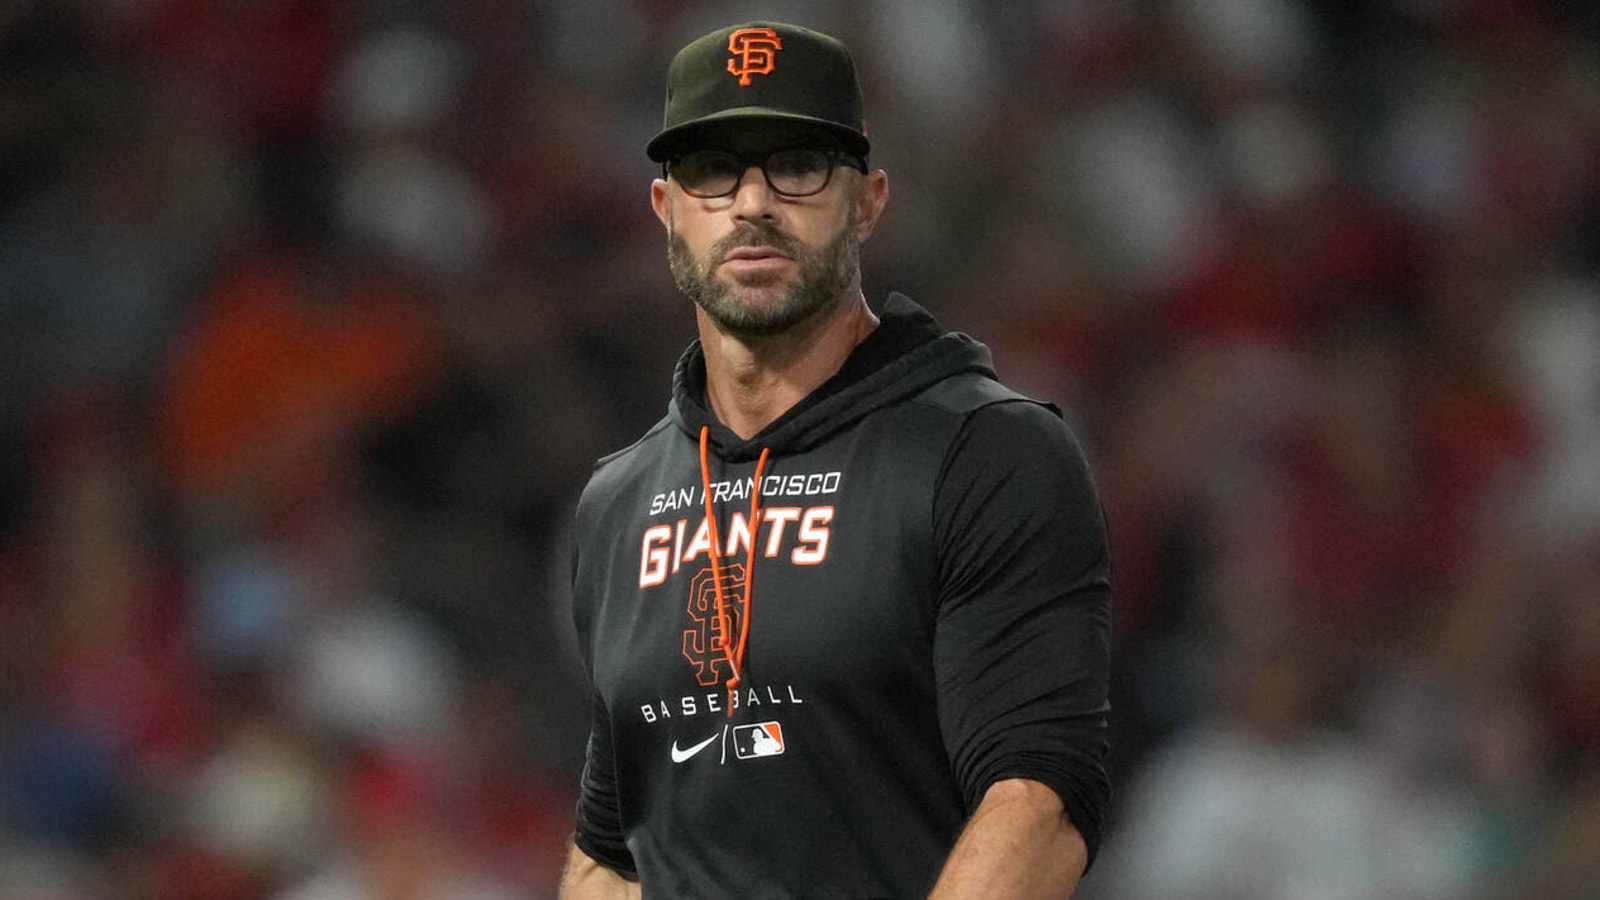 Marlins reel in former Giants manager for new role